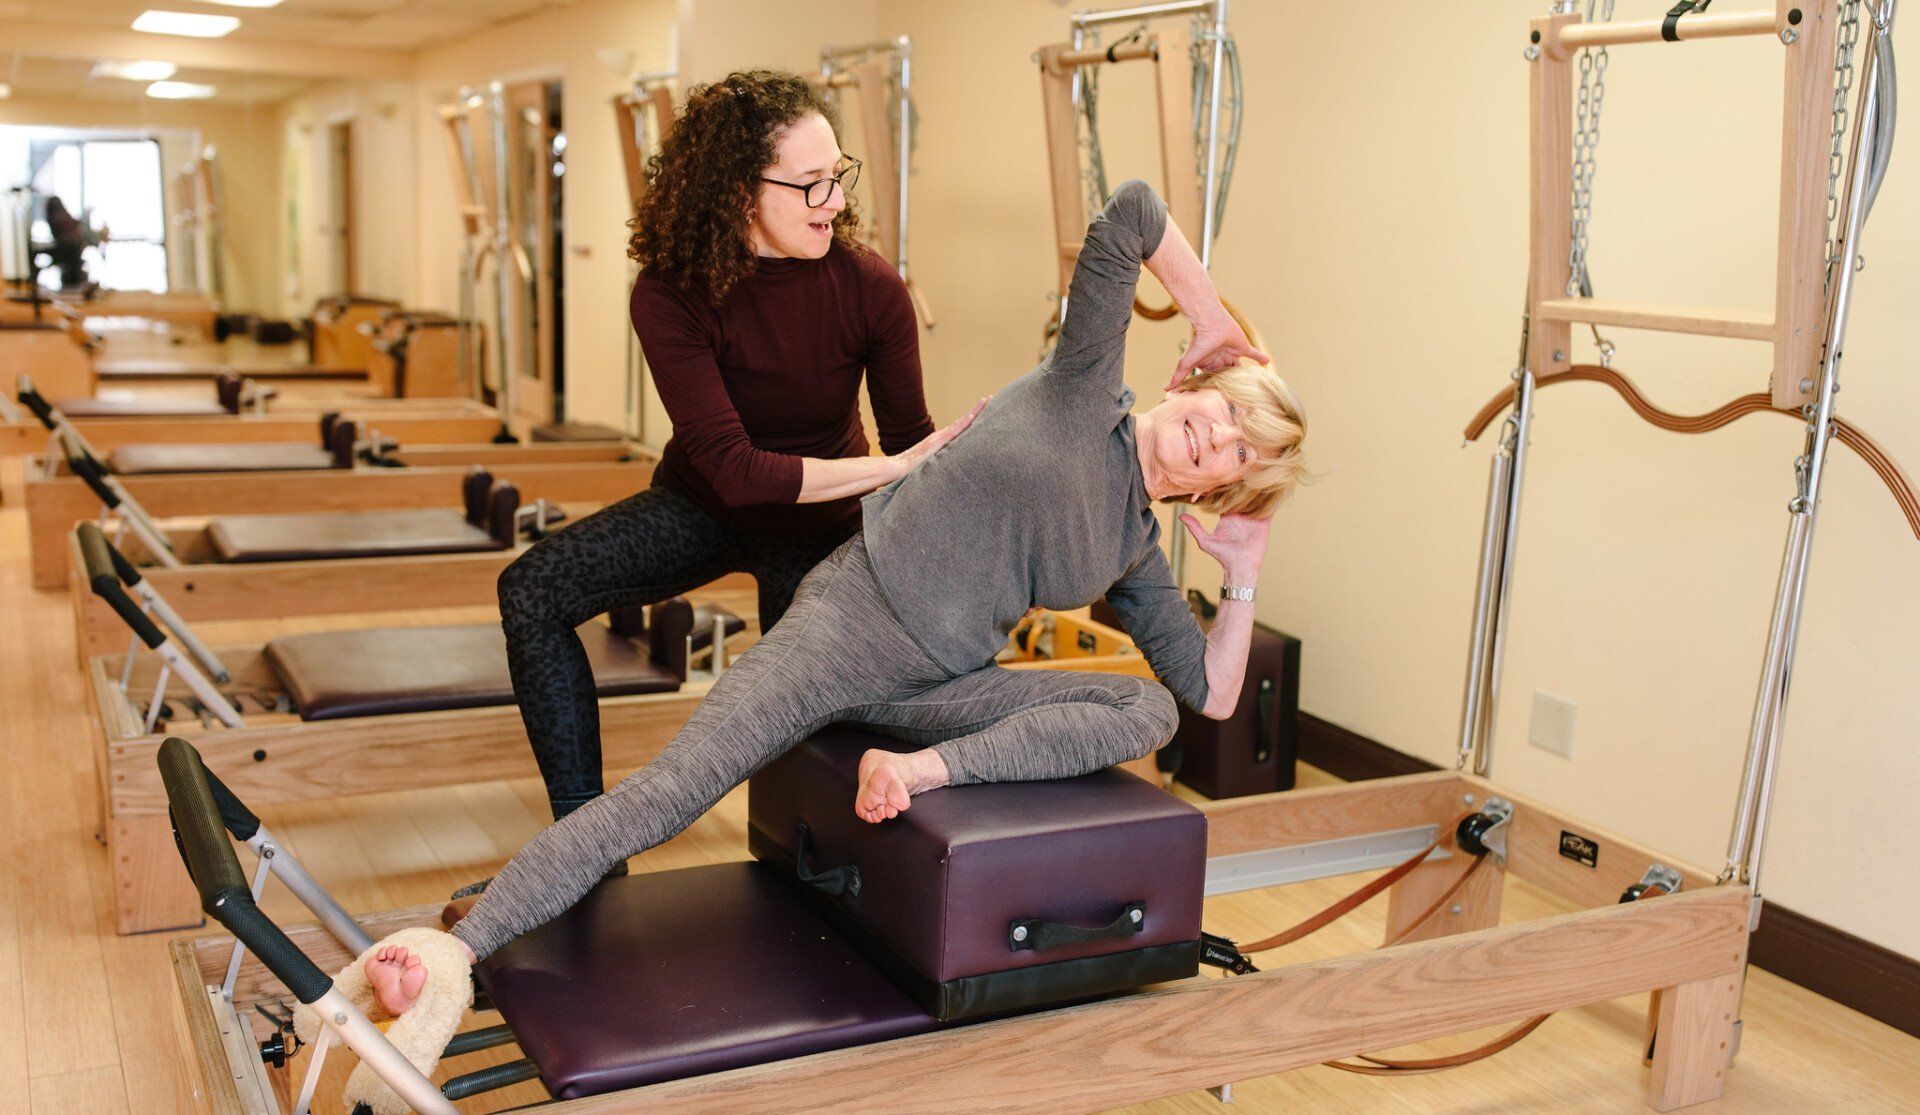 Pilates studio with people stretching